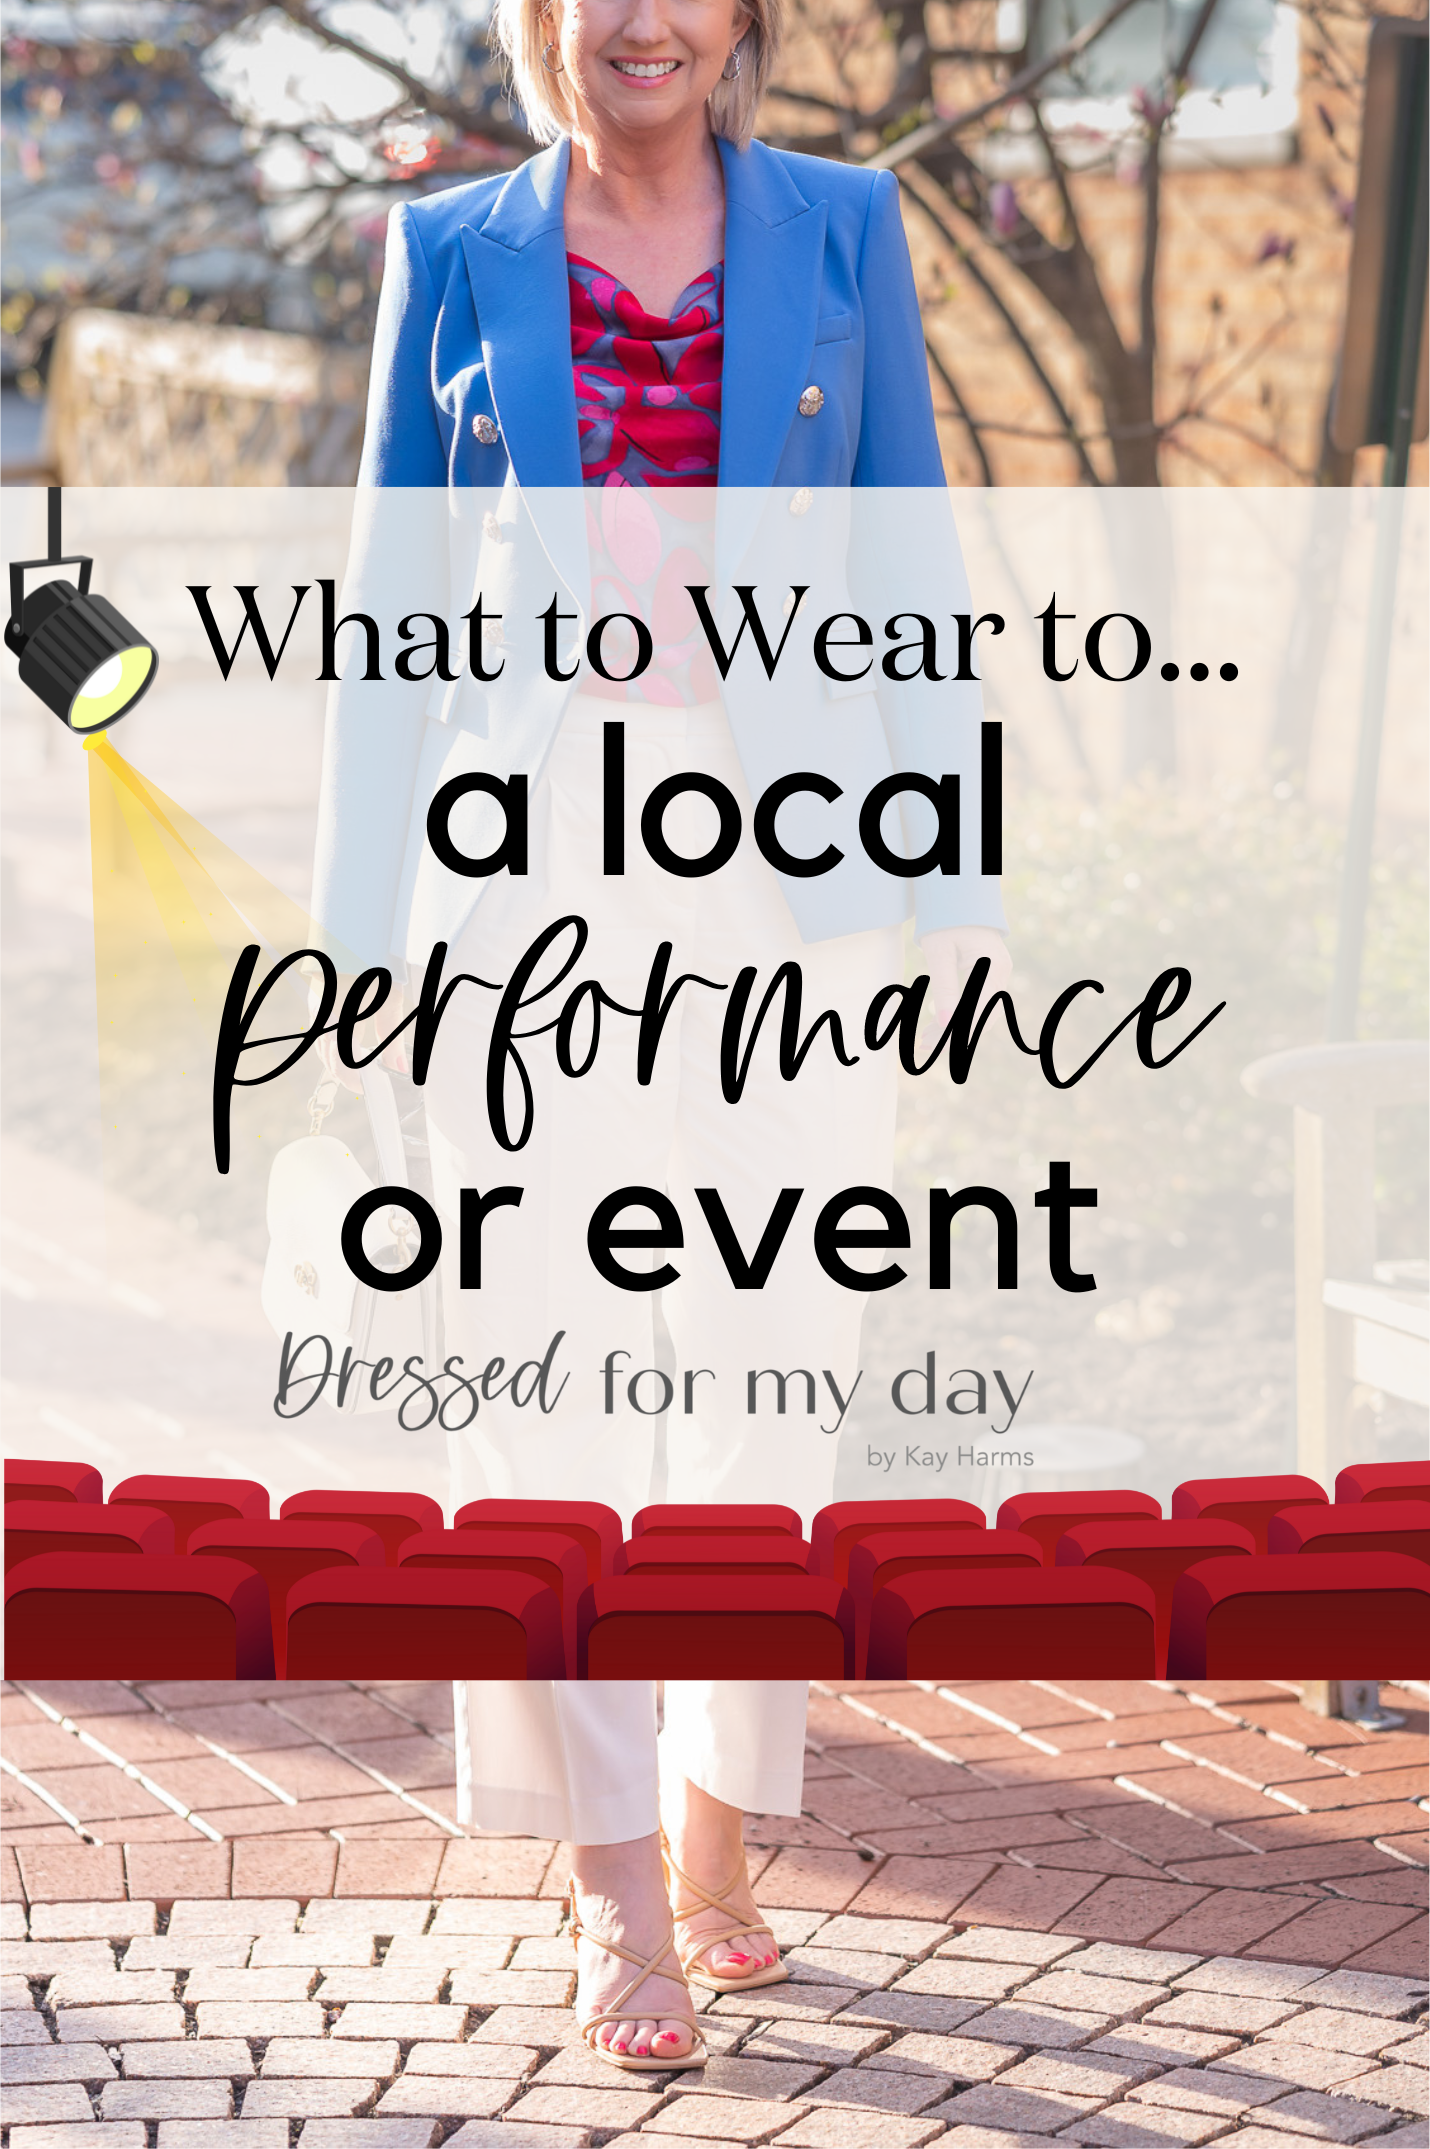 What to Wear to a Local Performance or Event